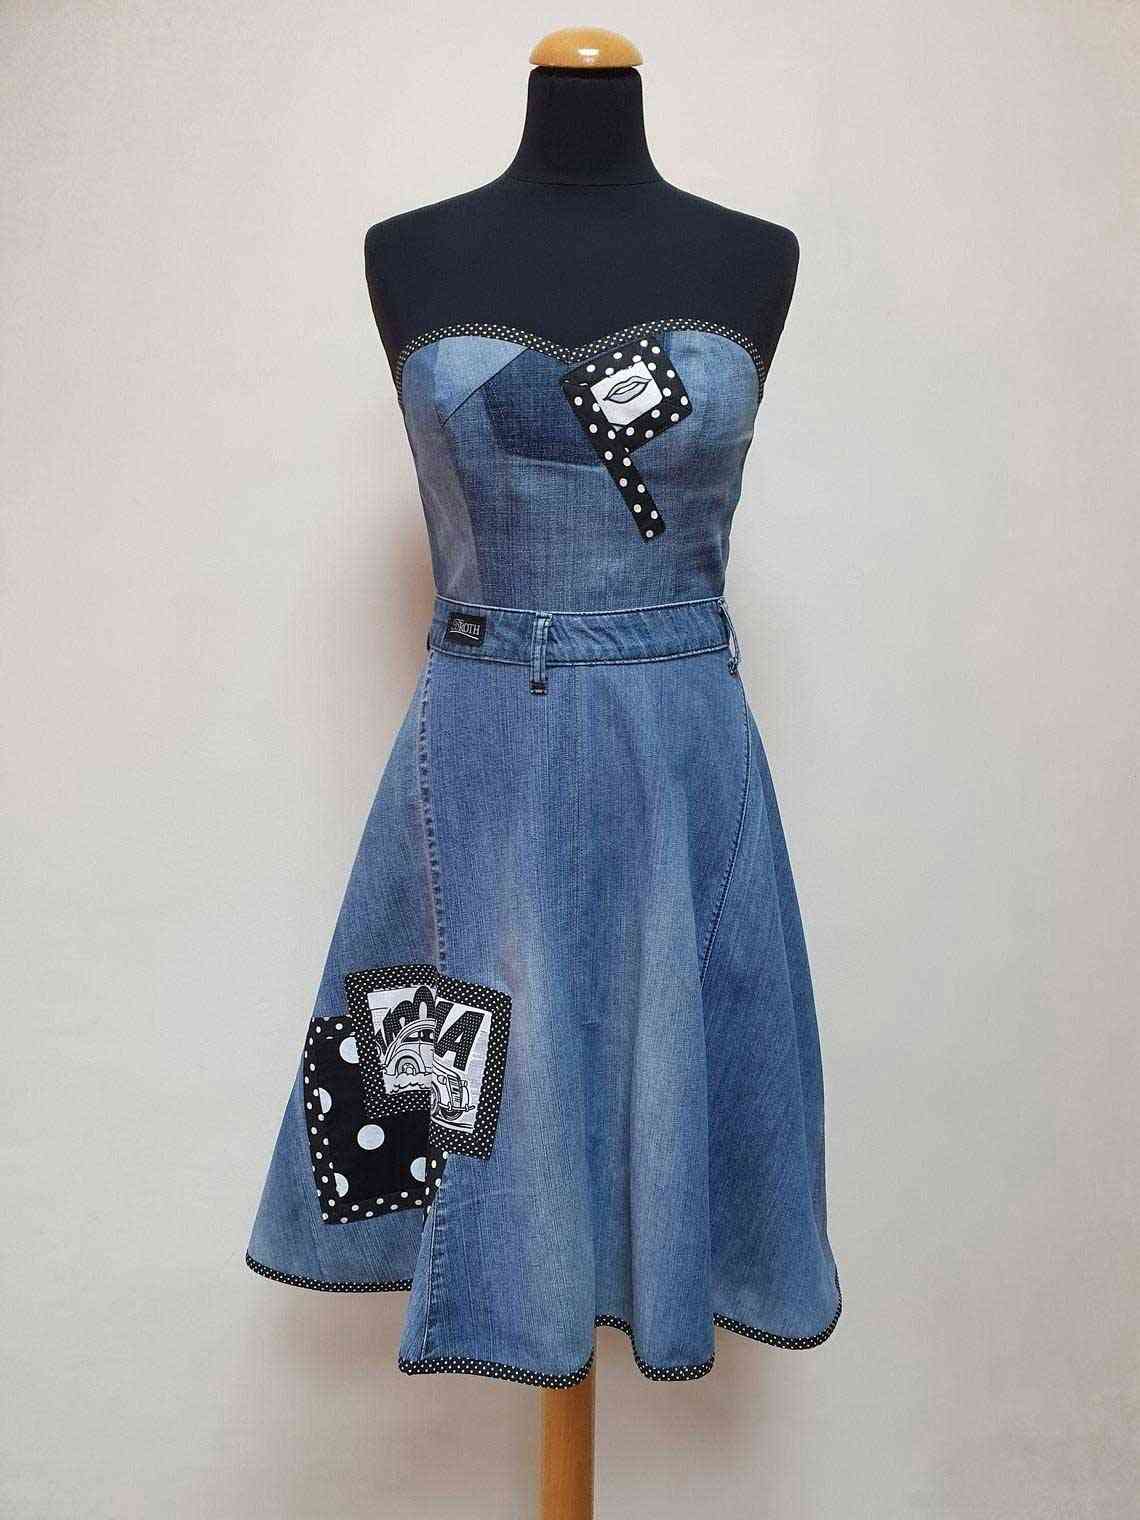 Example: Denim dress made of old jeans 